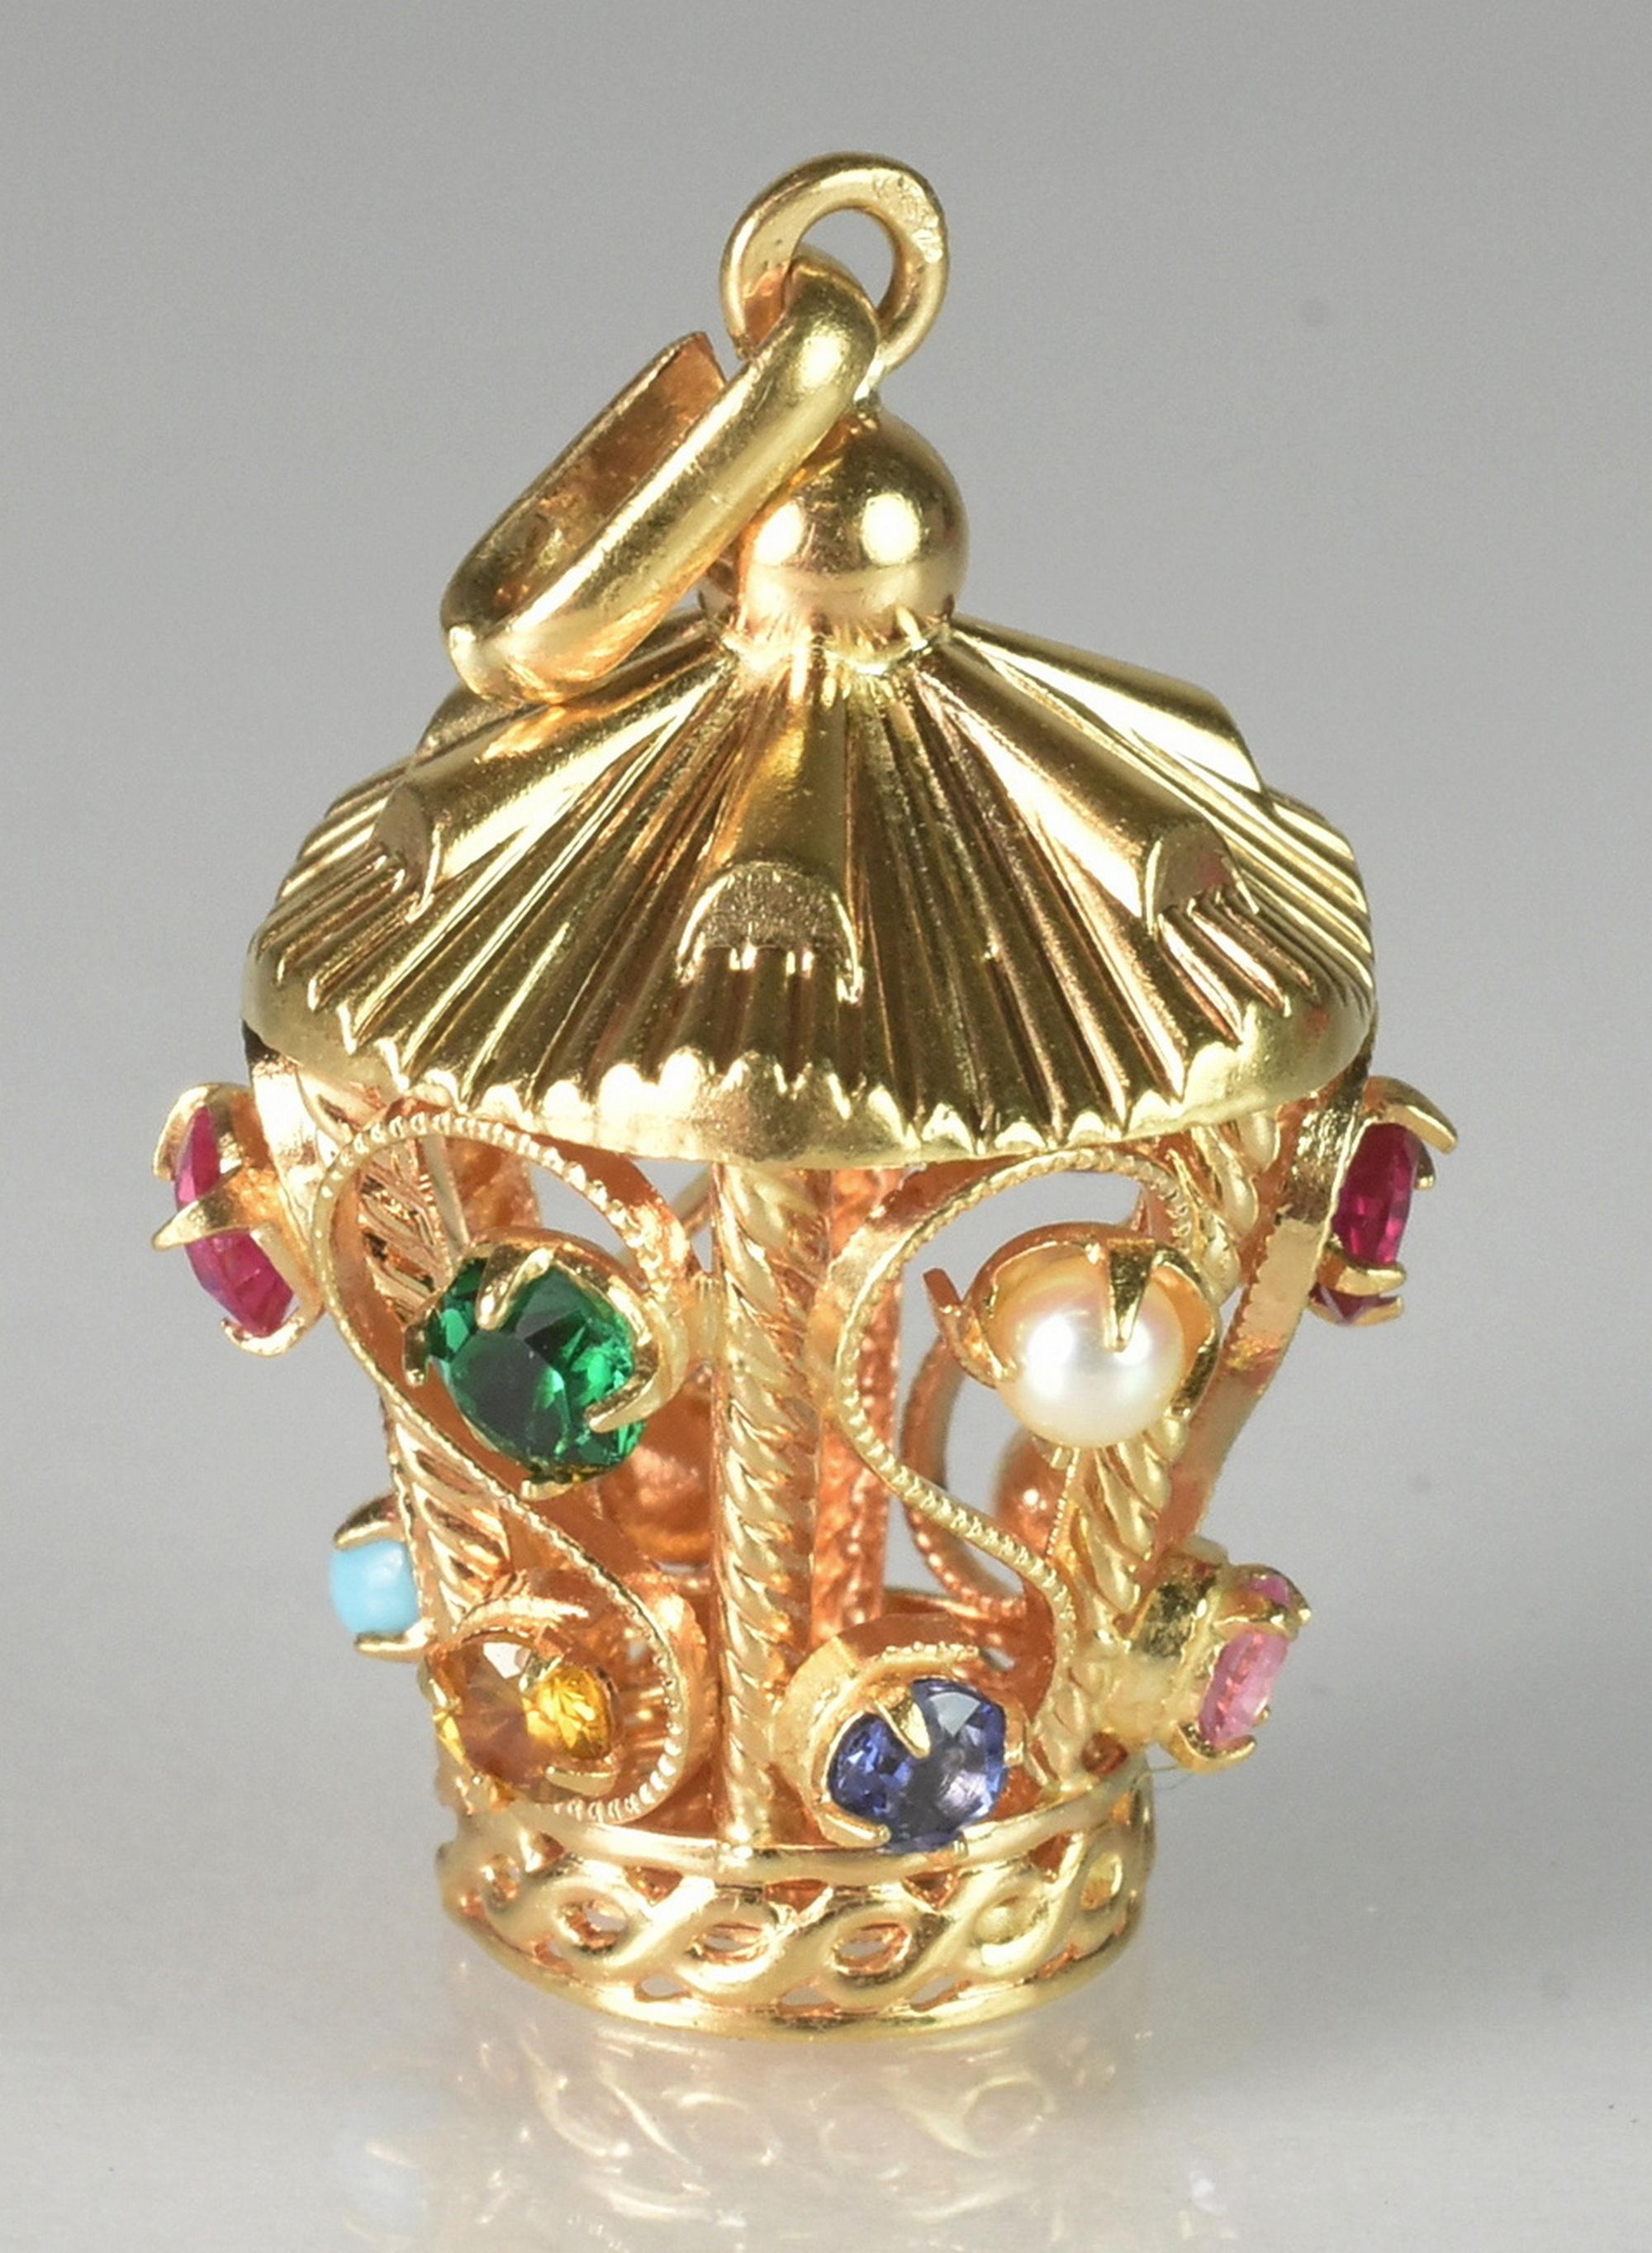 18K Yellow Gold Lantern Charm with Multicolored Stones. Great condition. Measures 5/8